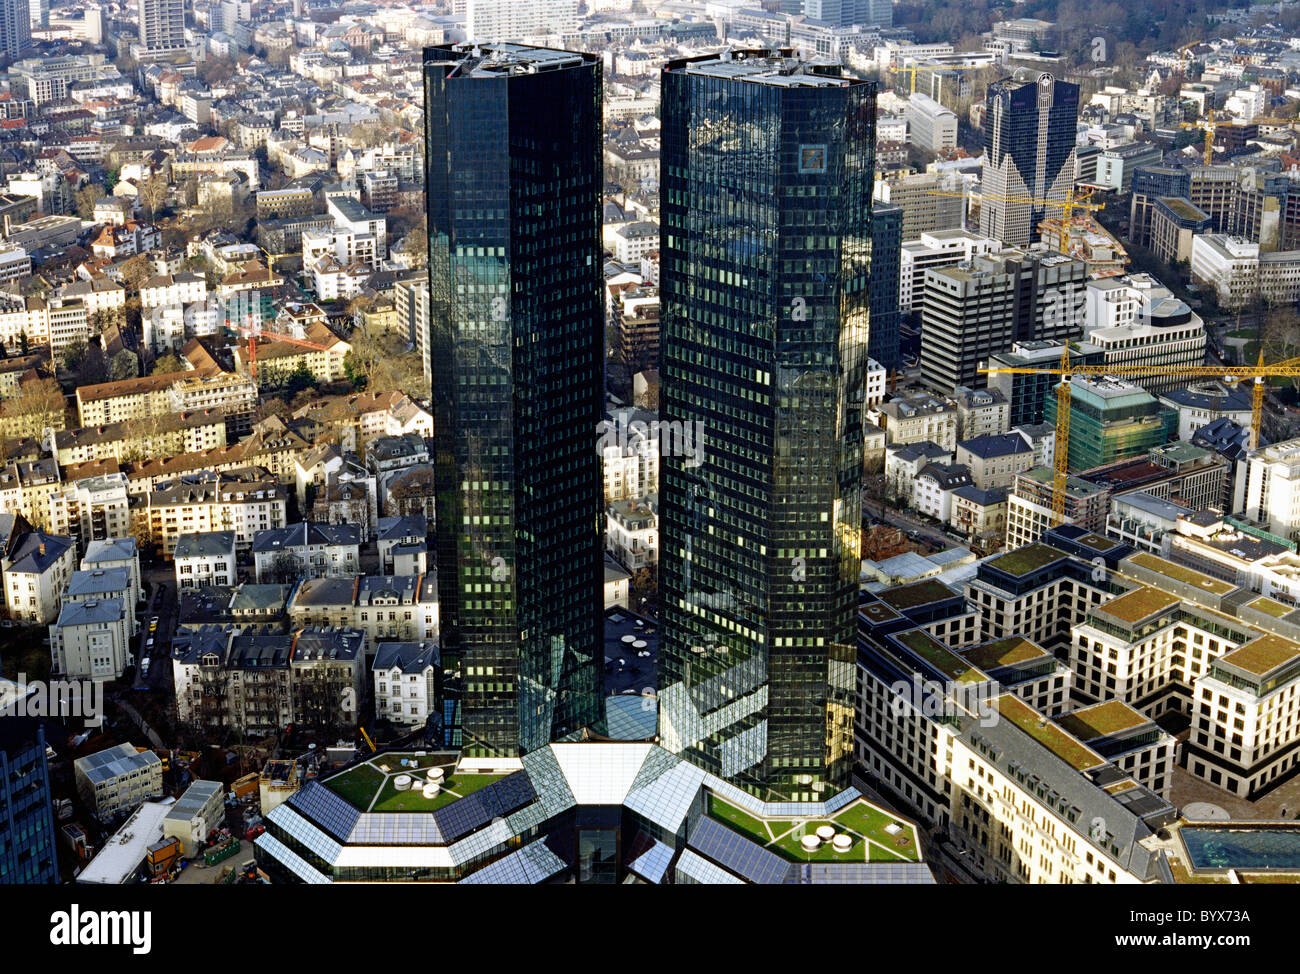 Aerial View Of Deutsche Bank Twin Towers Greentowers In The German City Of Frankfurt Am Main Stock Photo Alamy